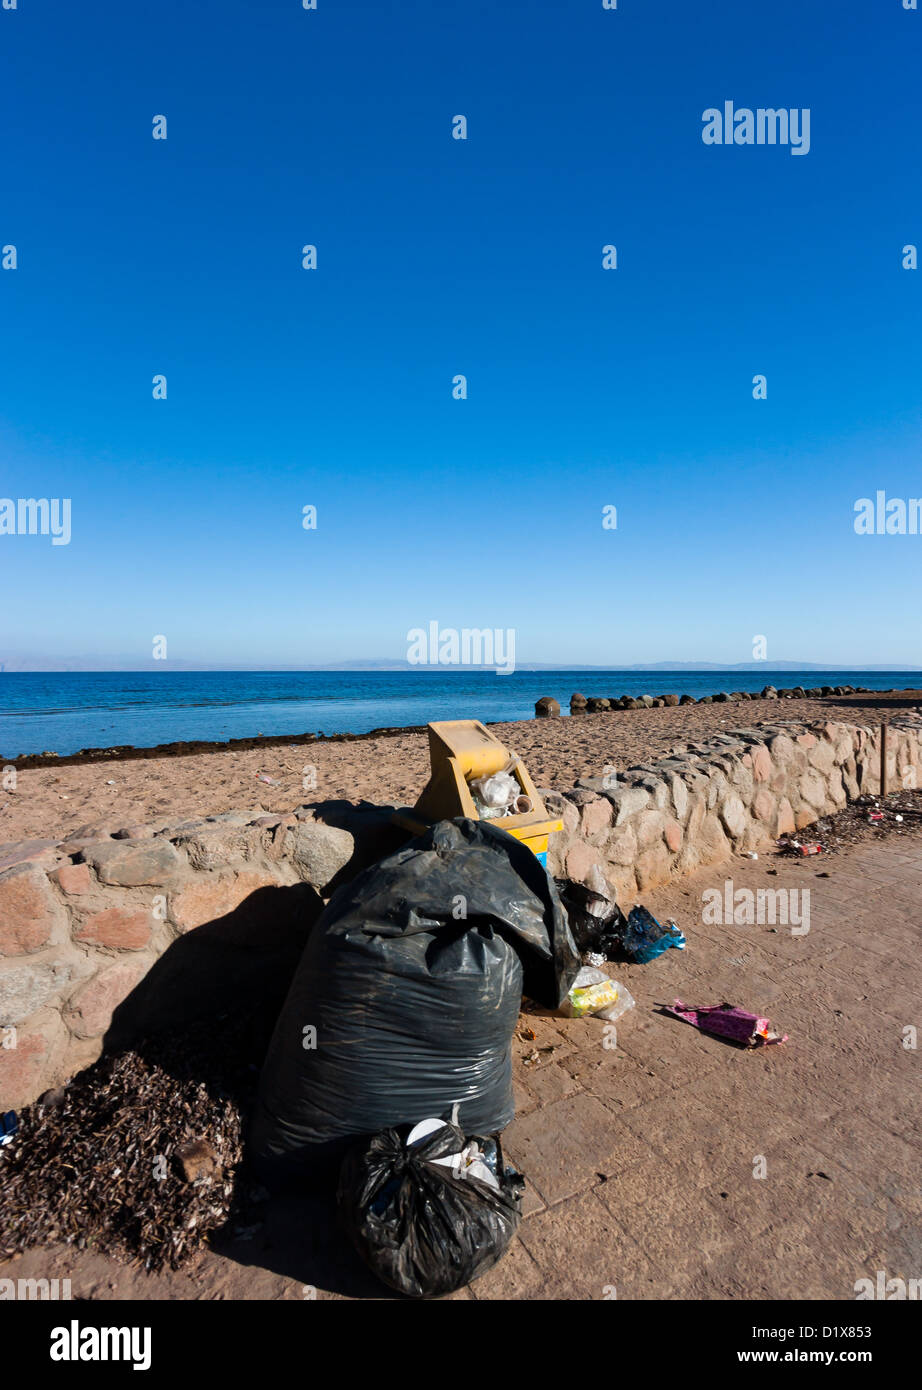 Overflowing abandoned bins and garbage bags left next to a tropical beach Stock Photo